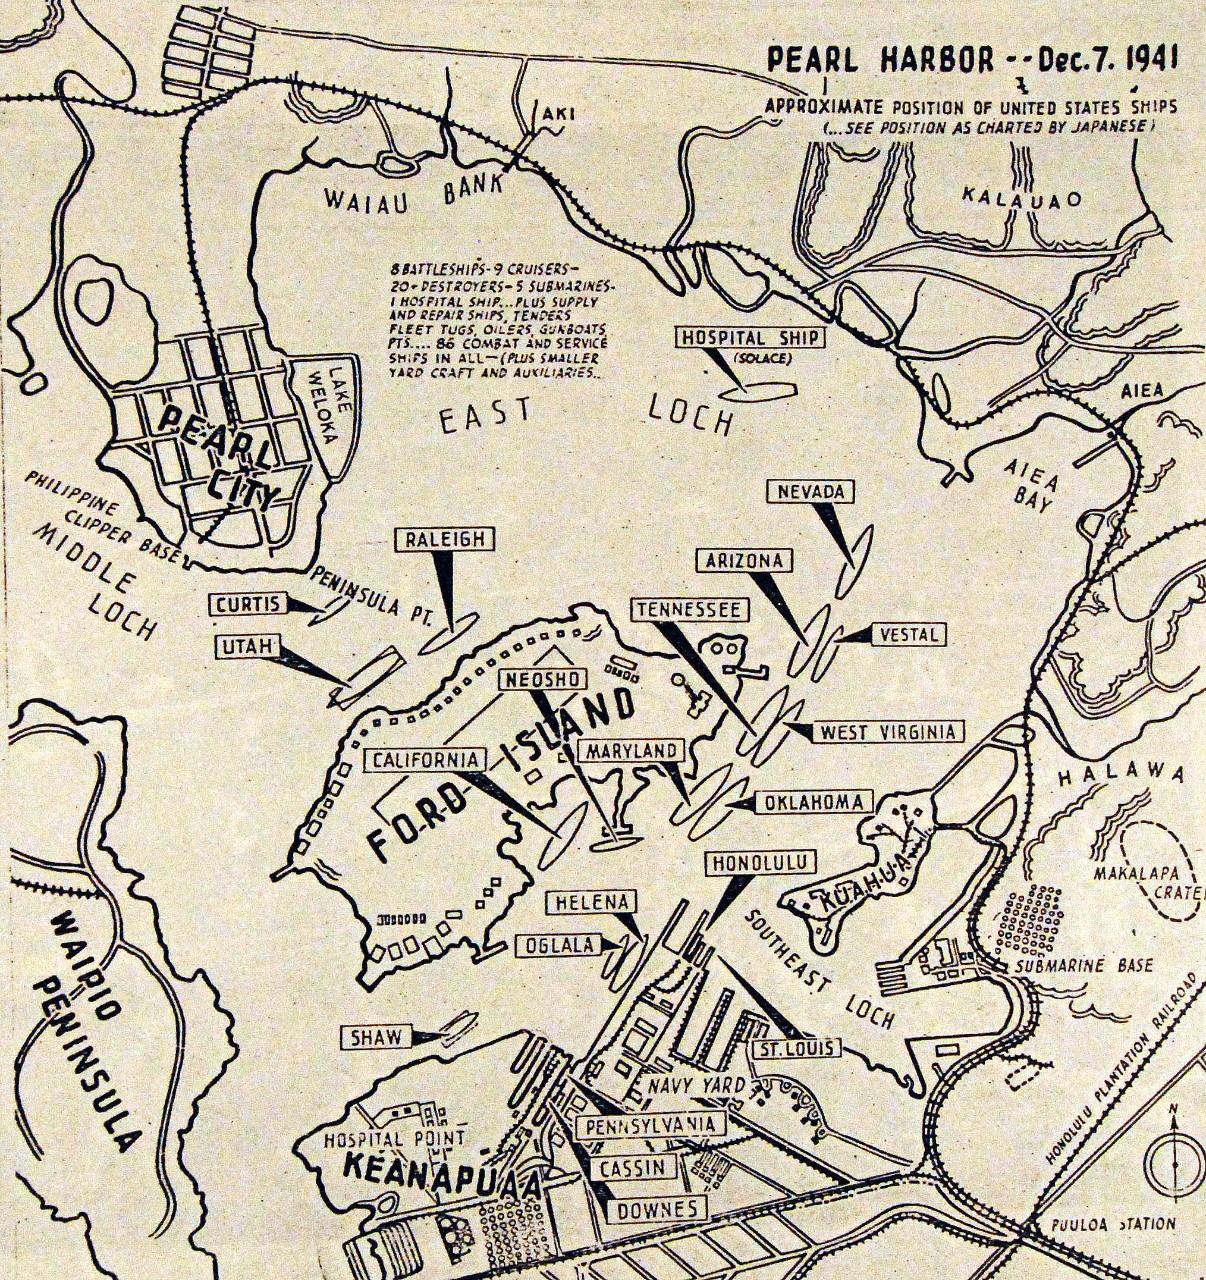 80-G-947105:  Map of Pearl Harbor, Hawaii, during the first six months of the Pacific war, released in connection with the publication of “Battle Report “ by Commander Walter Karig, USNR, and Lieutenant Welborne Kelley, USNR.   This map shows the approximate position of ships on December 7, 1941.   Photograph received November 27, 1944.  U.S. Navy photograph, now in the collections of the National Archives.        (7/22/2015).